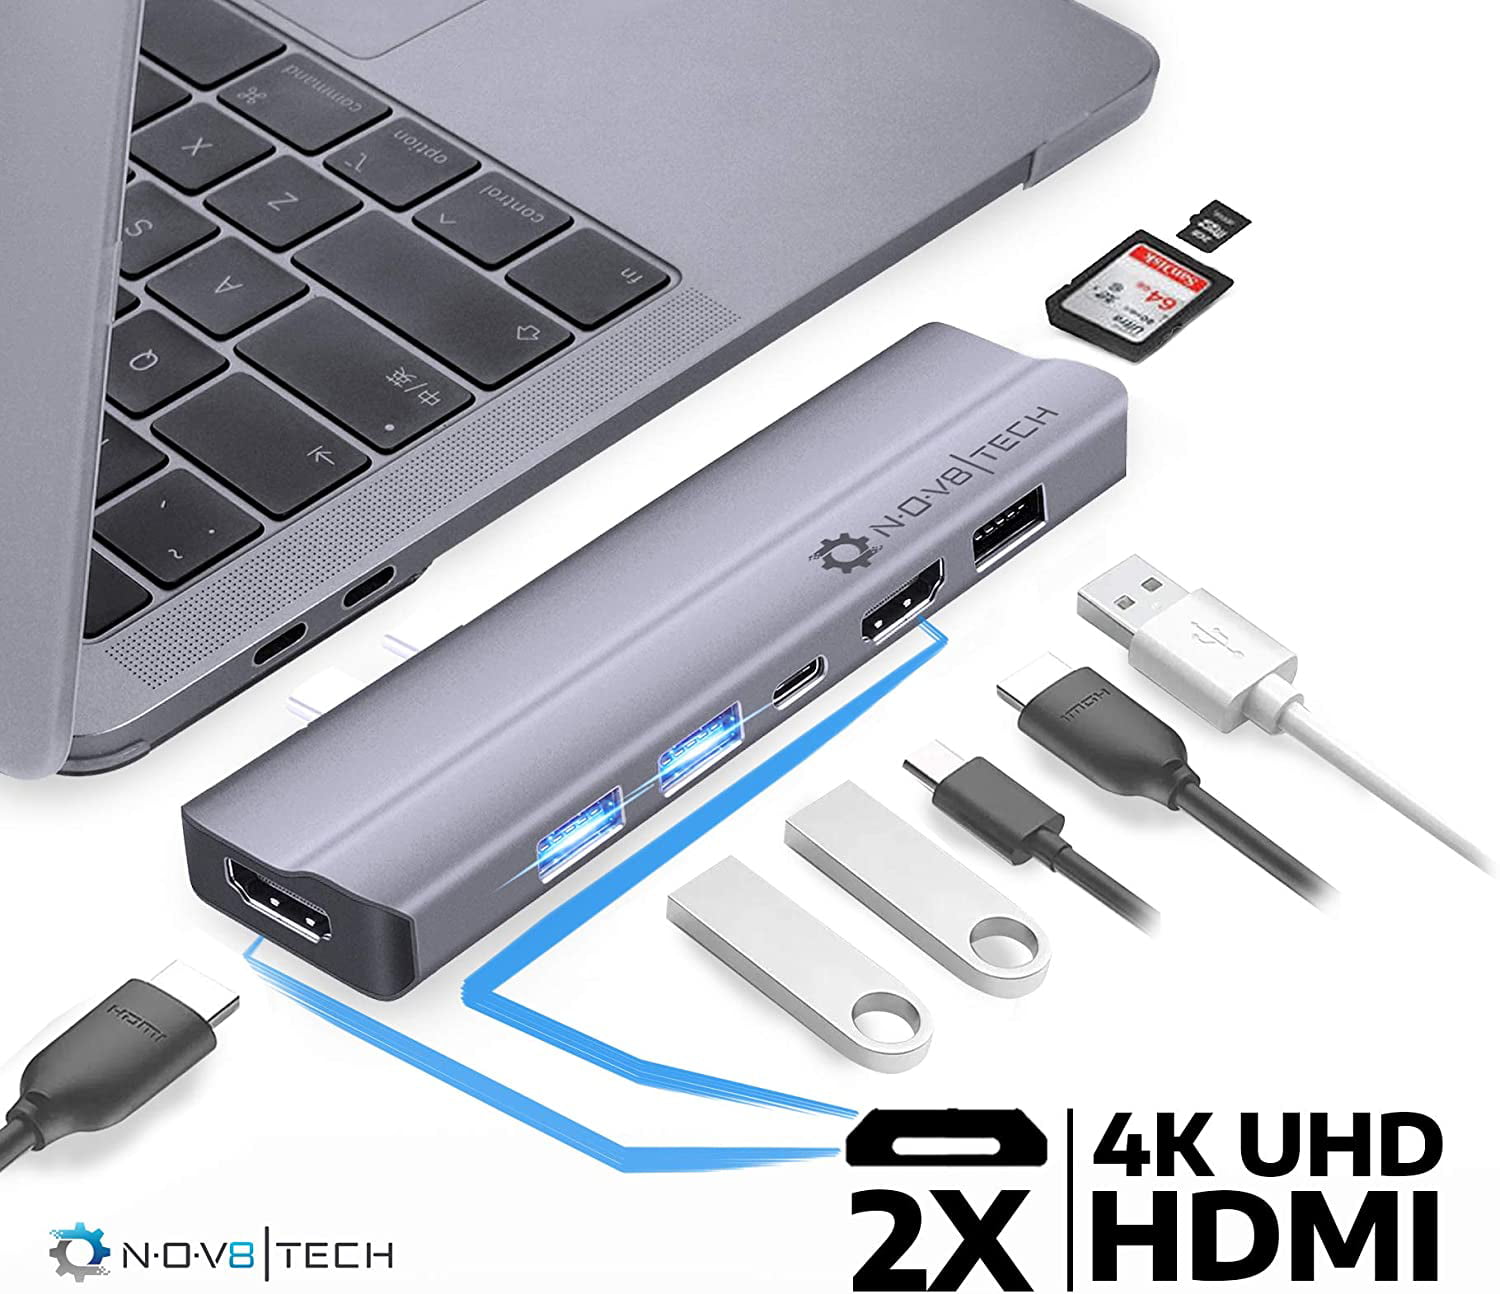 SD/Micro SD 7-in-2 Slim Type C Adapter with 4K HDMI 2X USB 2.0 USB C 100W PD Power Delivery Charger USB 3.0 NOV8Tech USB C Hub for MacBook Air 2020/2019/2018 7-in-1 Gold